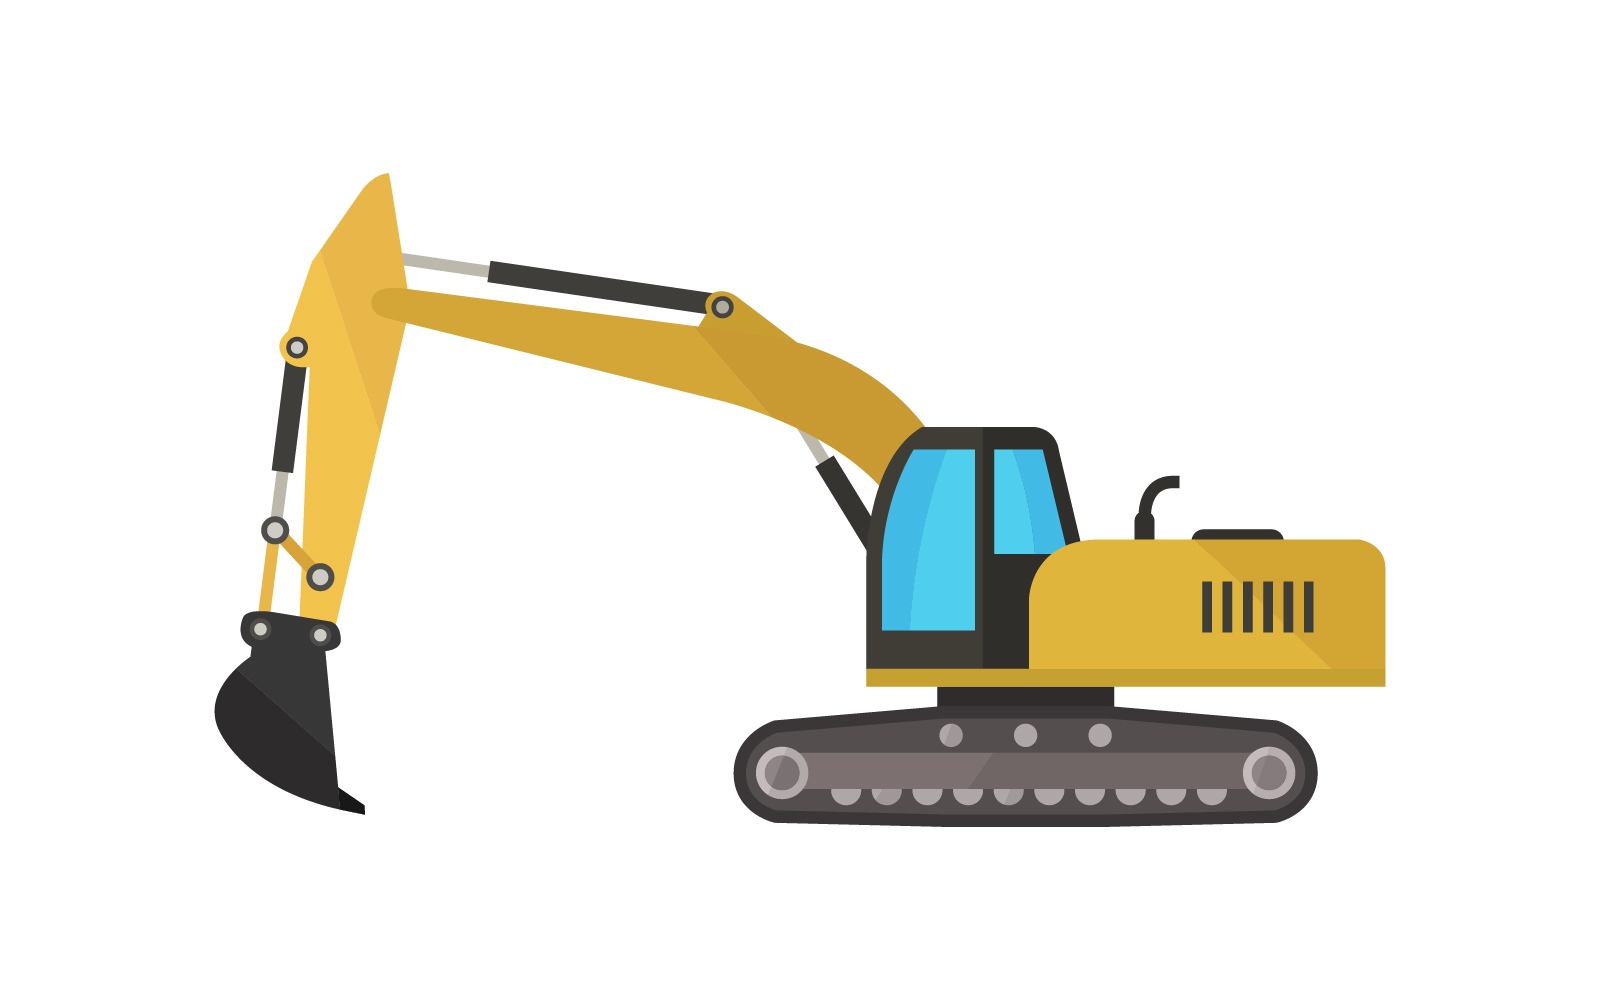 Excavator illustrated in vector on a white background